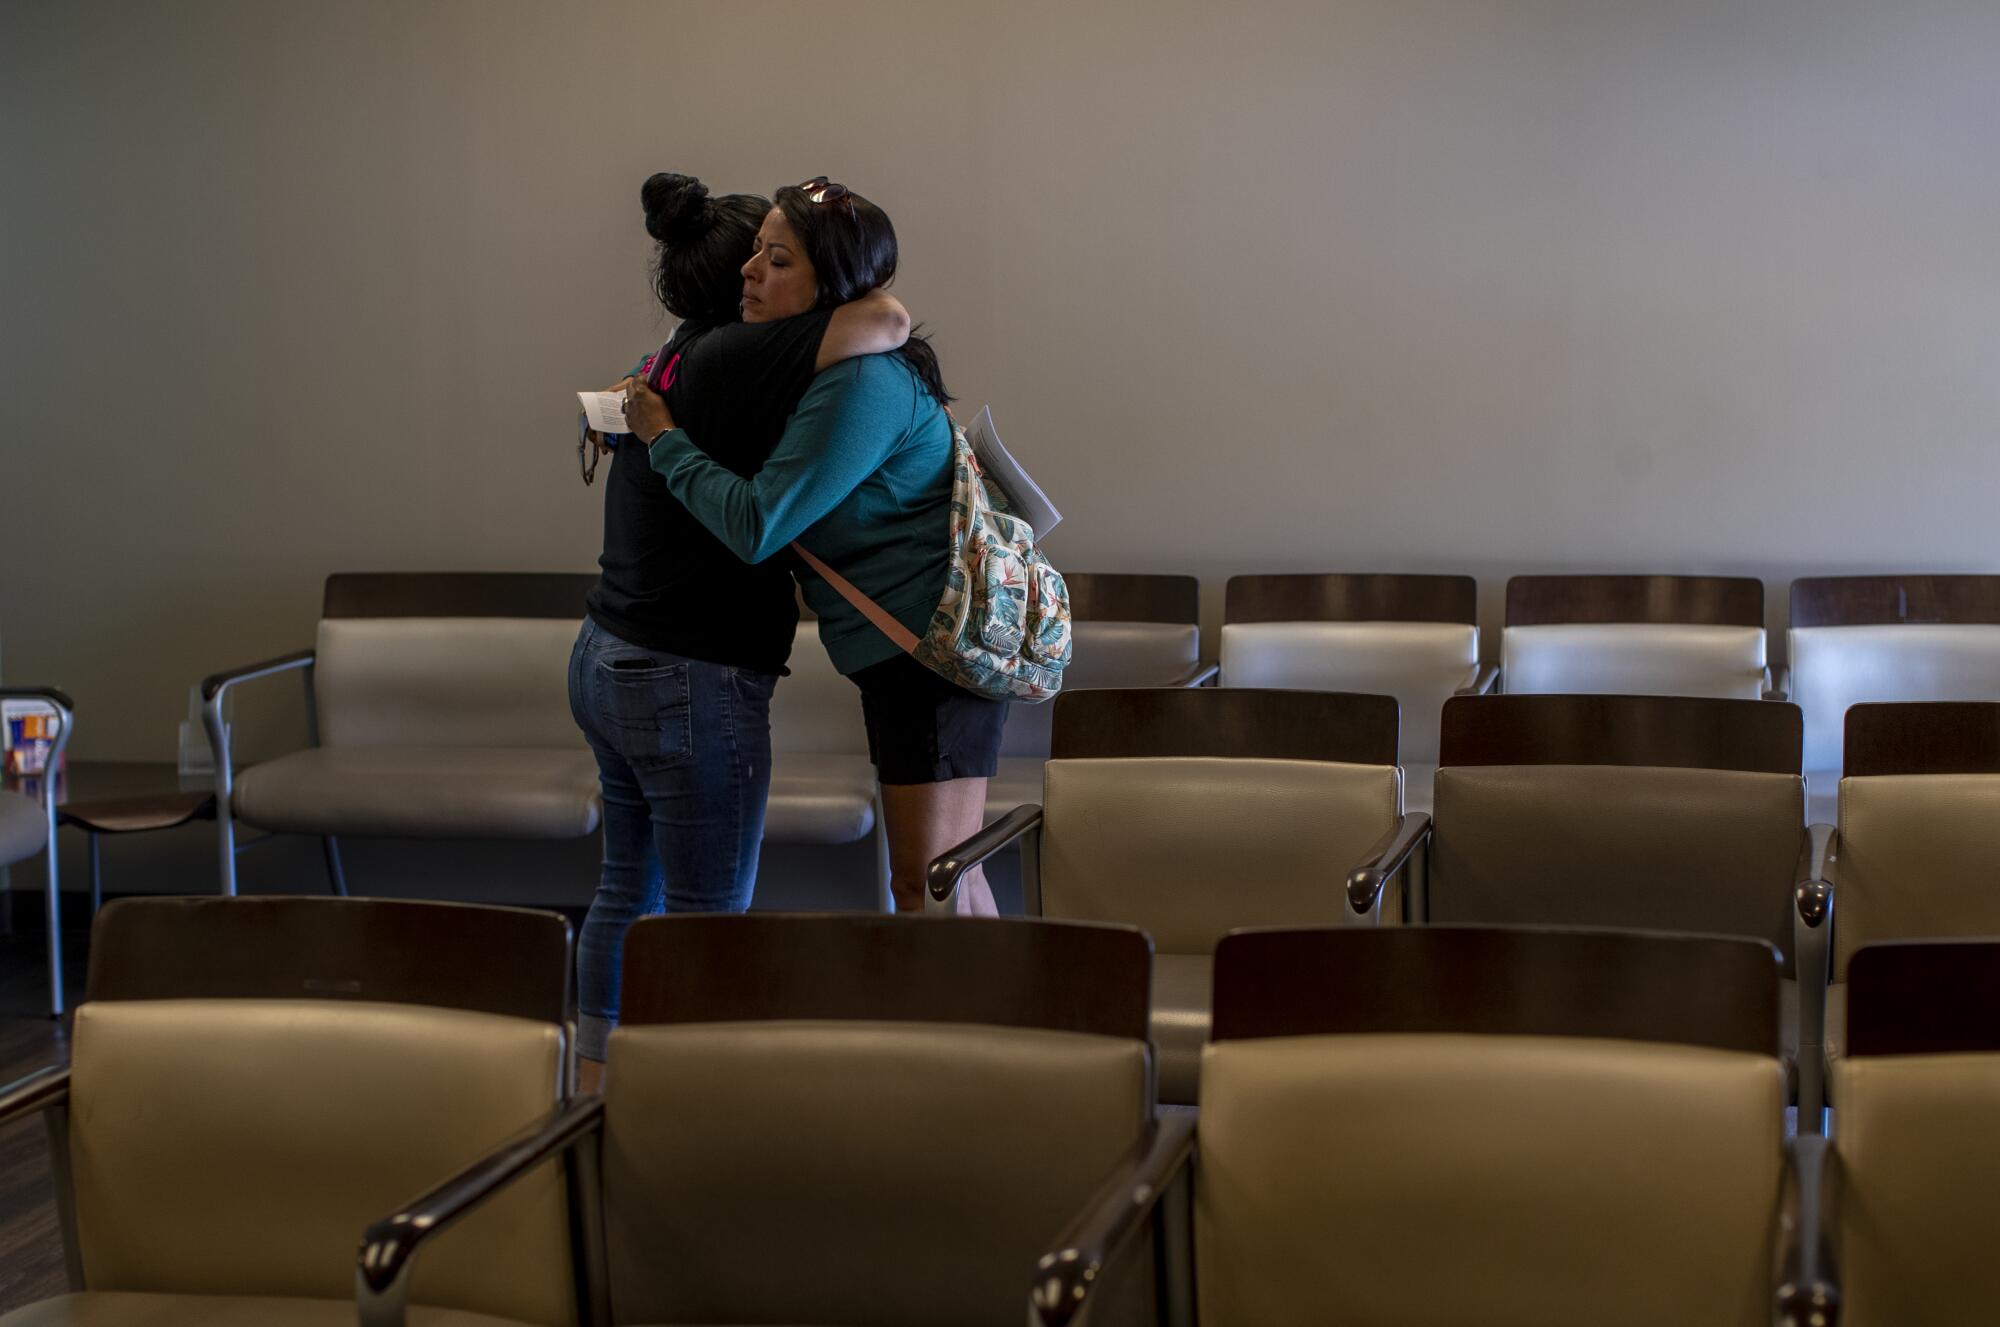 A teary staff member hugs a patient after informing her the clinic could no longer provide abortion services 